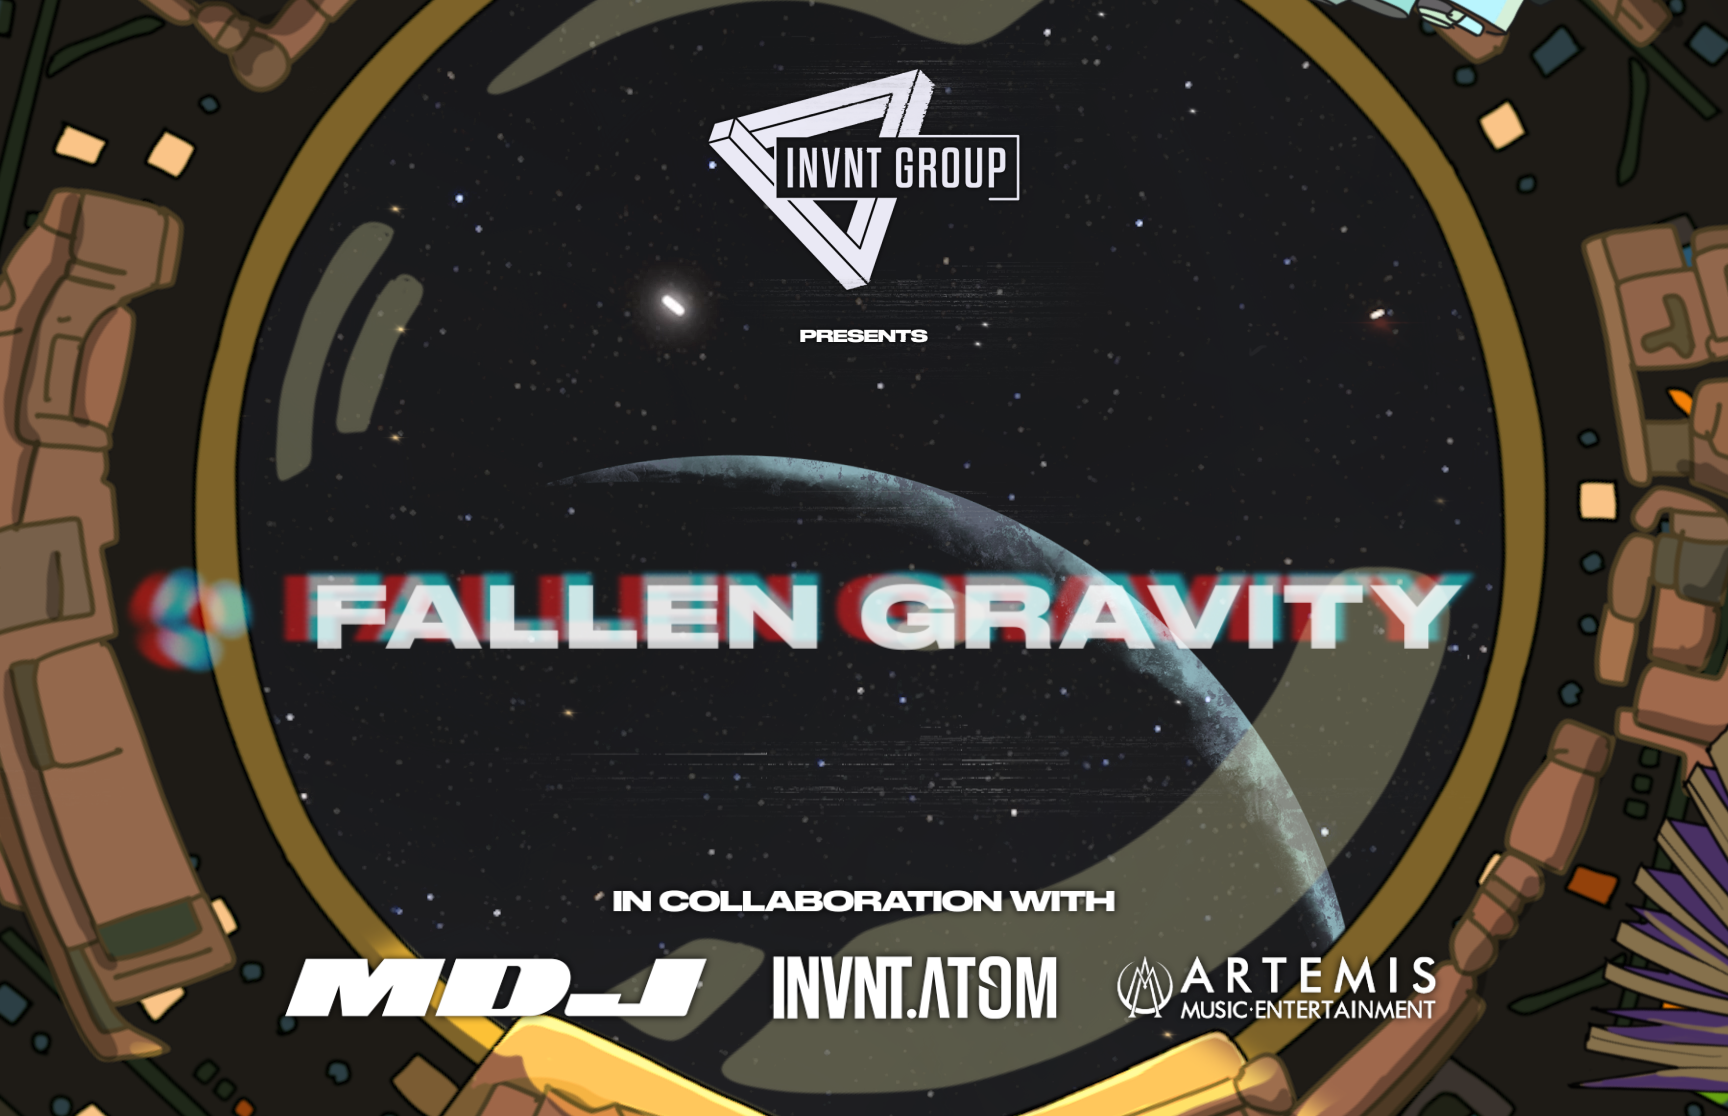 Fallen Gravity is now available at niftygateway.com/fallengravity